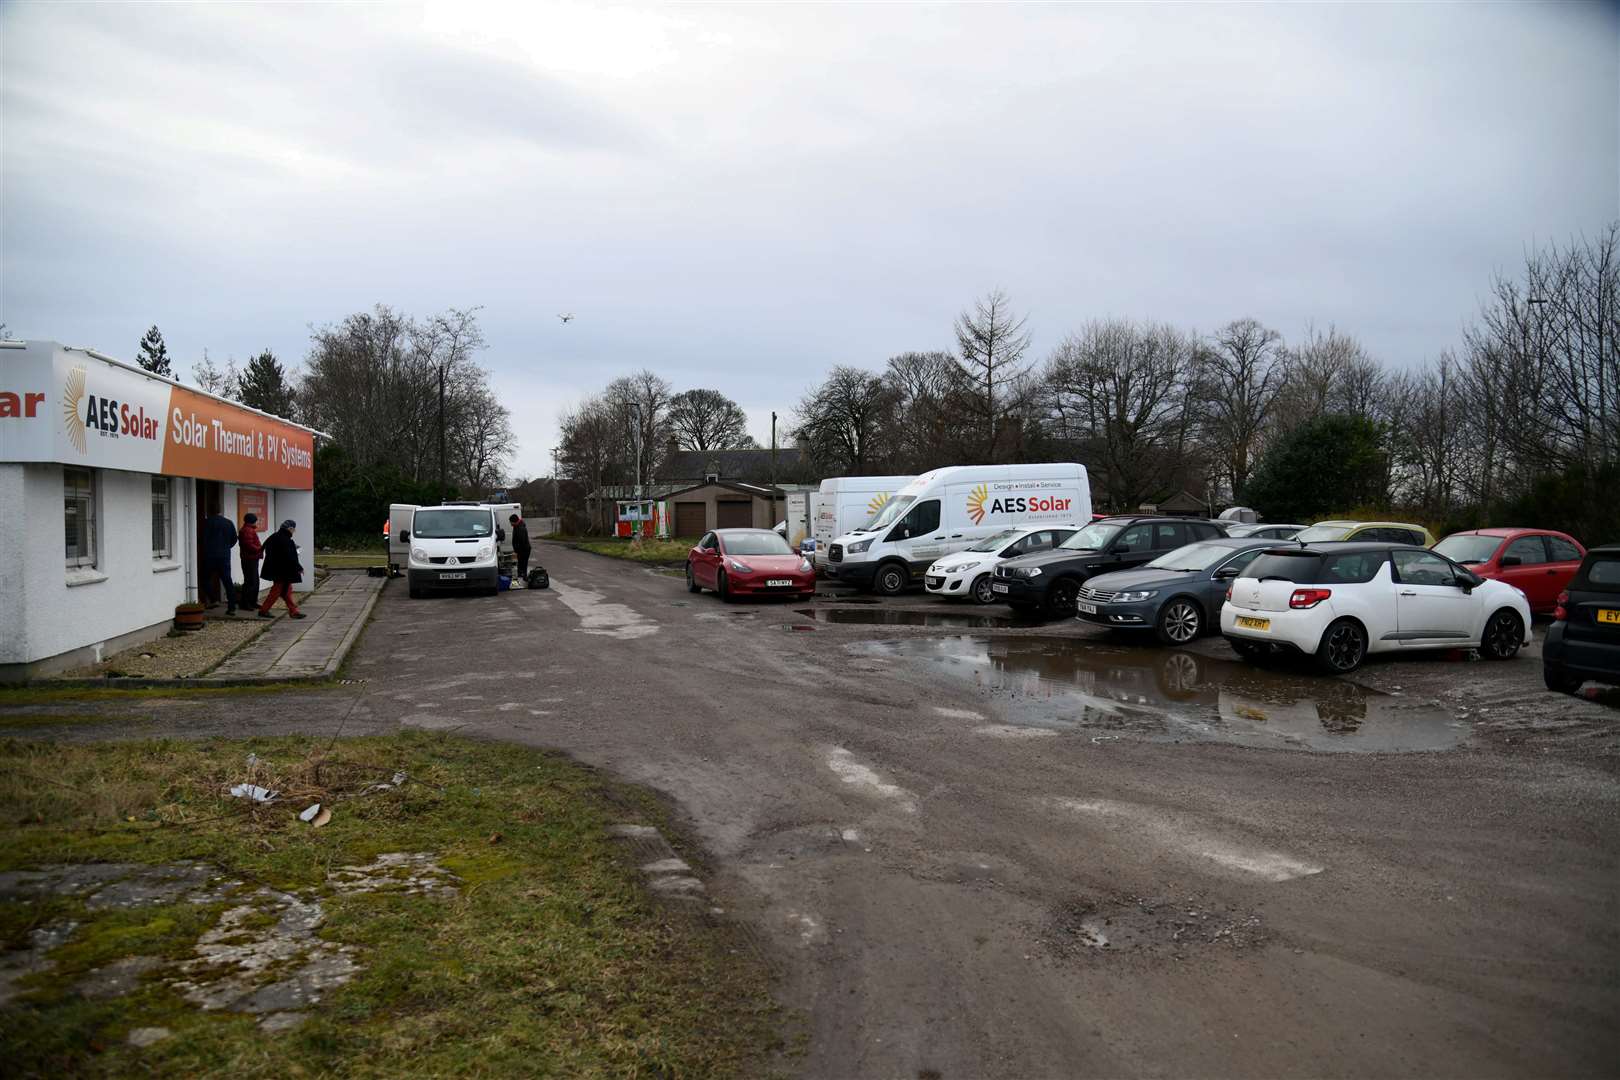 An application to build flats has been accepted by the Scottish Government meaning there will no longer be anywhere to park outside AES Solar/Mosset Park. Picture: Becky Saunderson